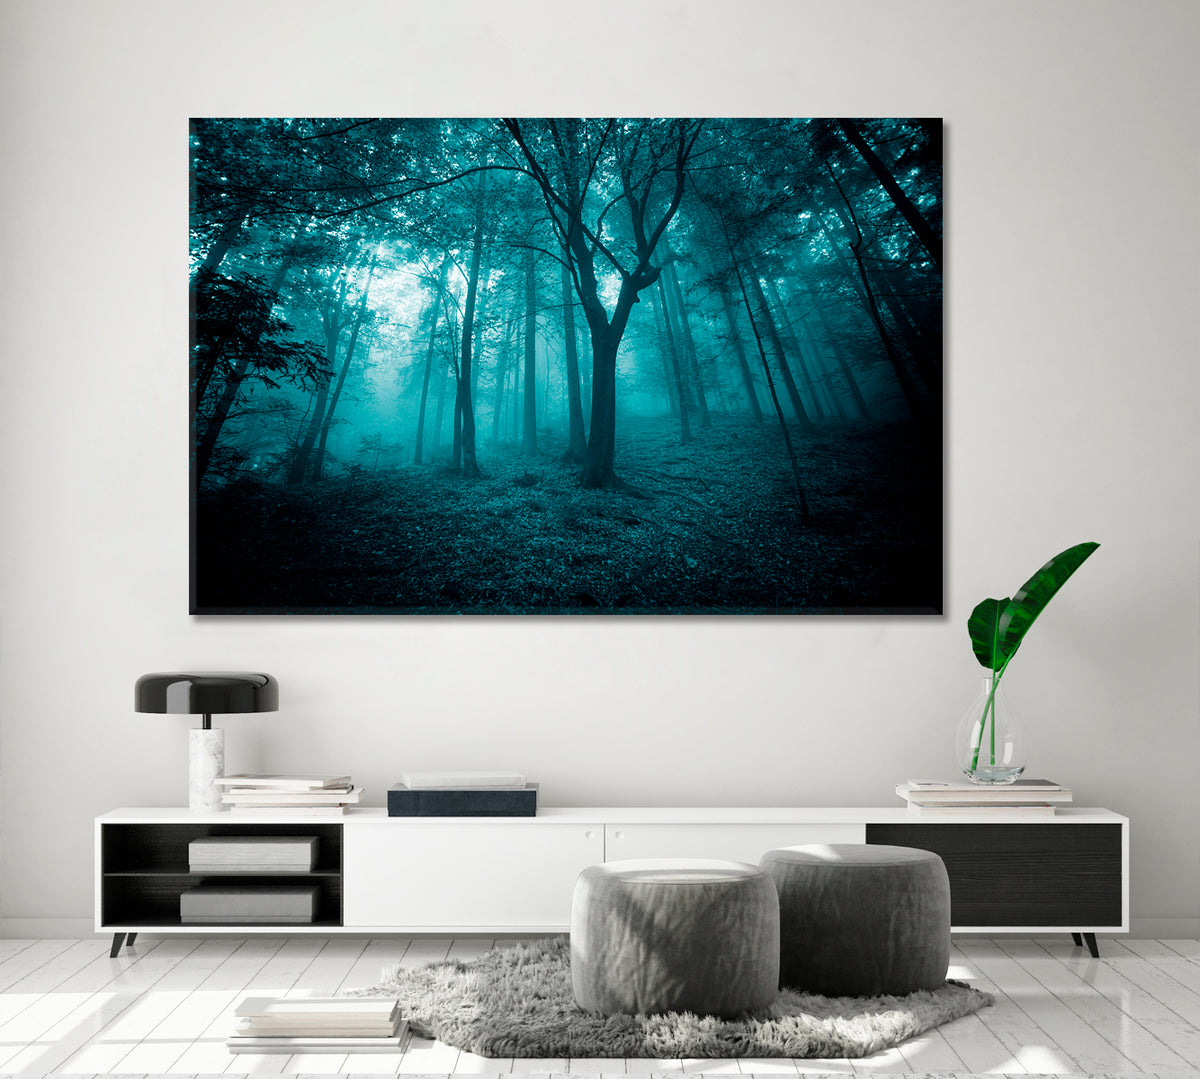 Mystic Turquoise Foggy Fairy Tale Forest Trees Landscape Nature Wall Canvas Print Artesty 1 panel 24" x 16" 